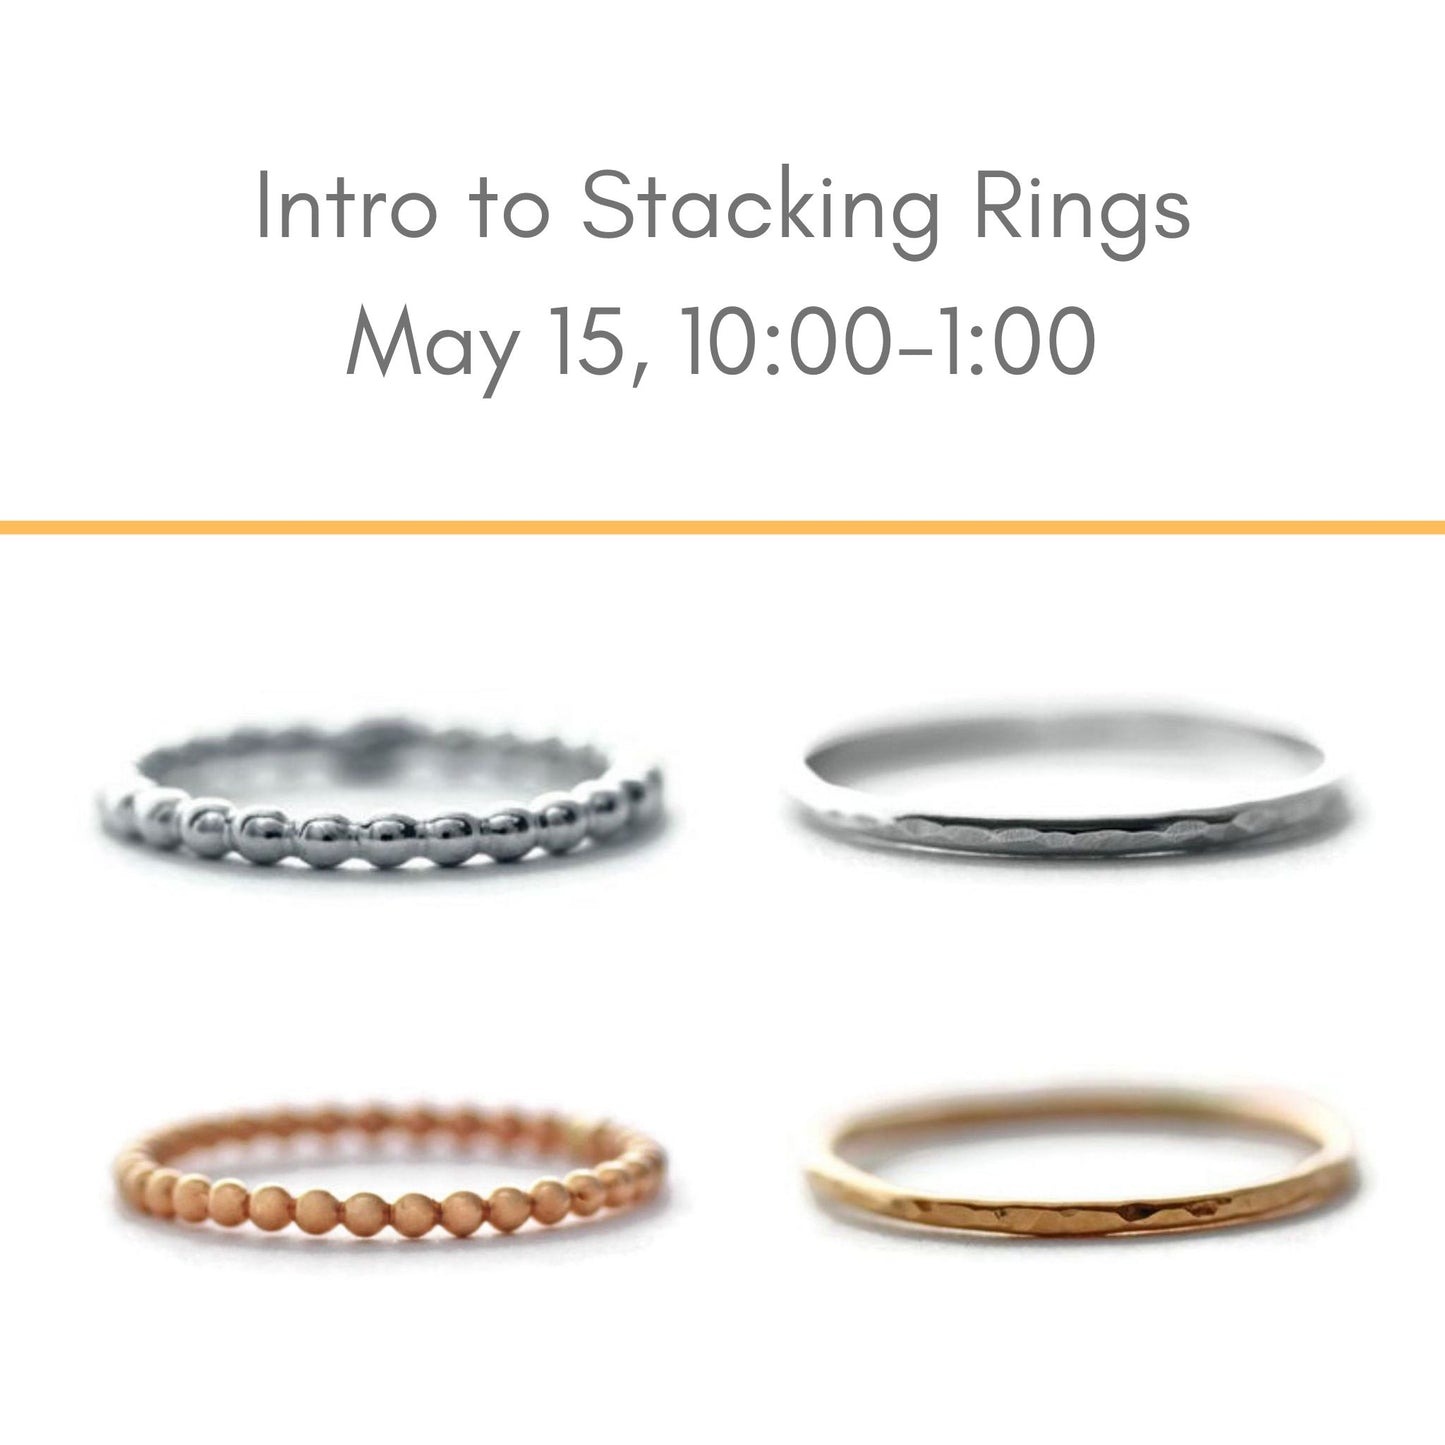 Intro to Stacking Rings May 15